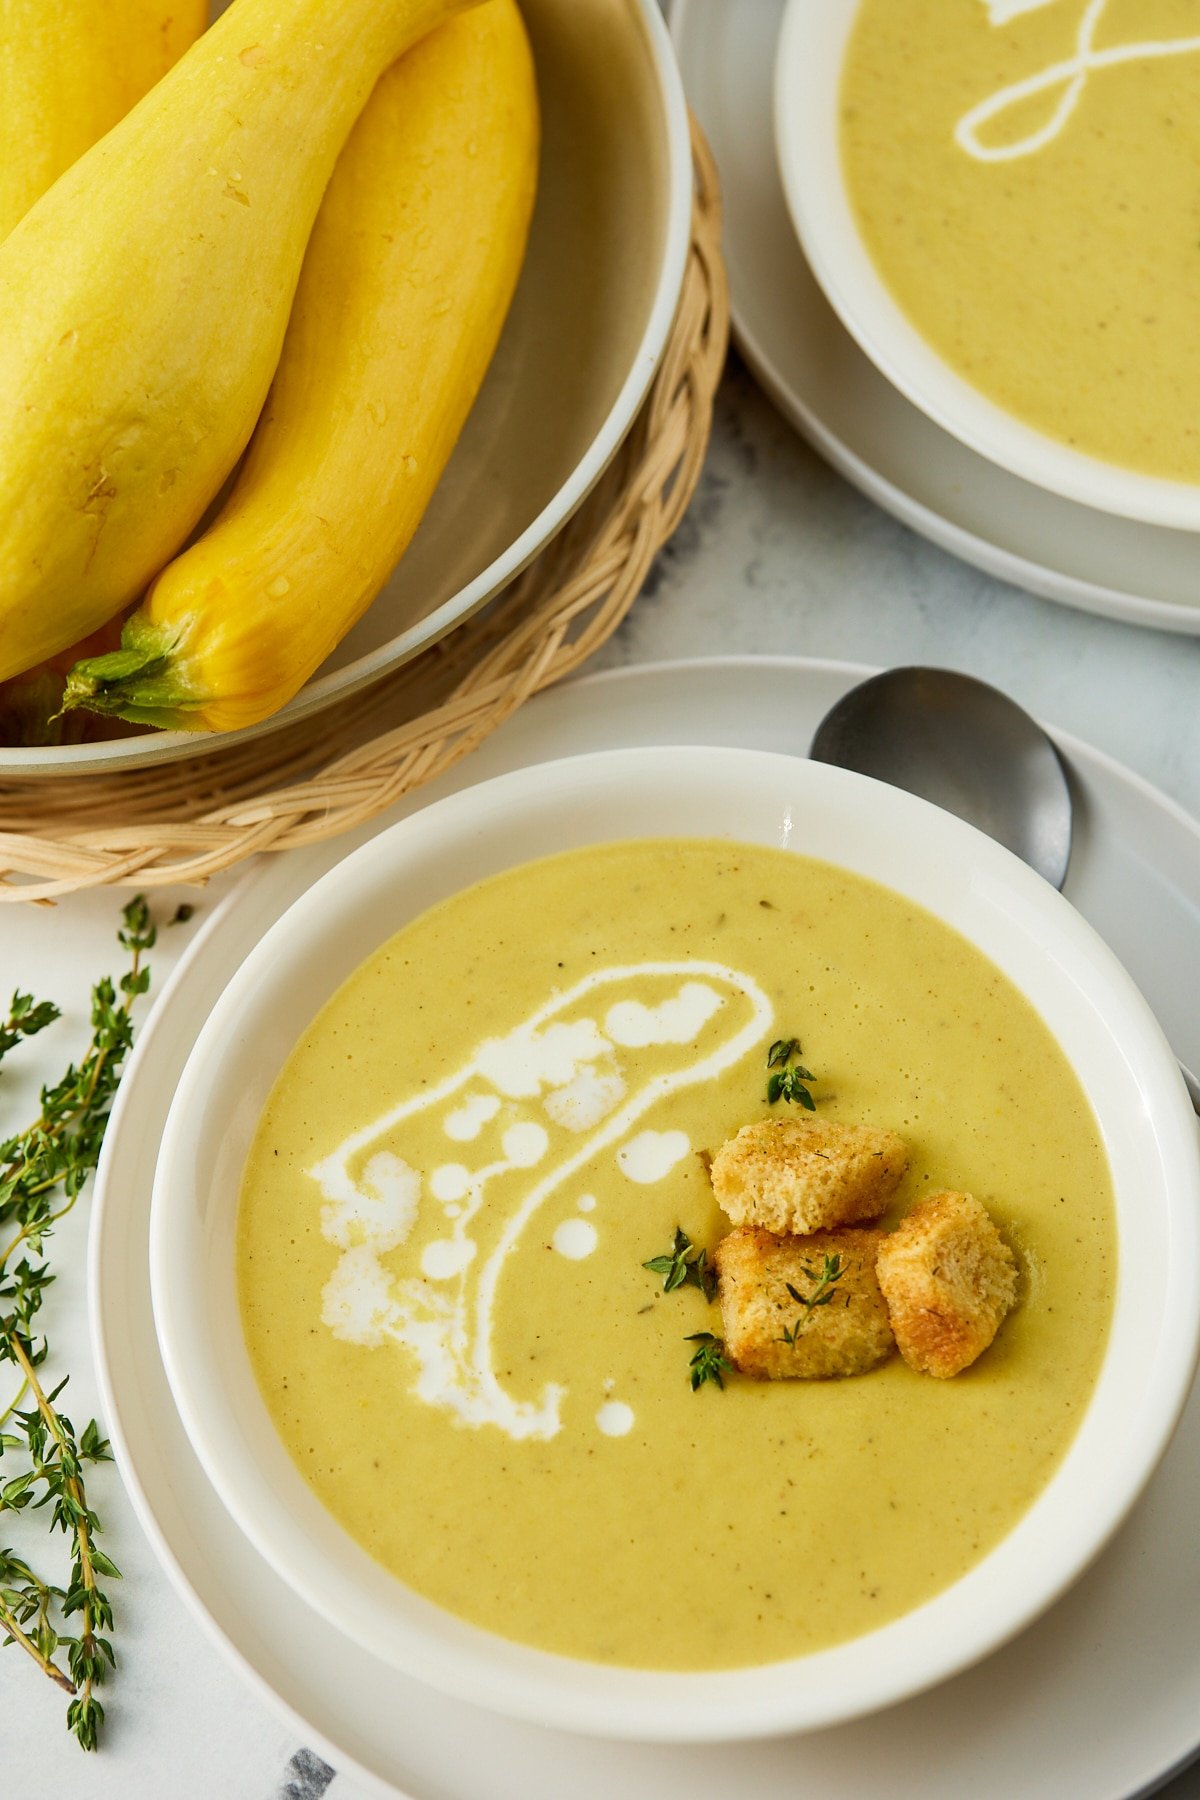 Yellow squash soup served in a white bowl with croutons.